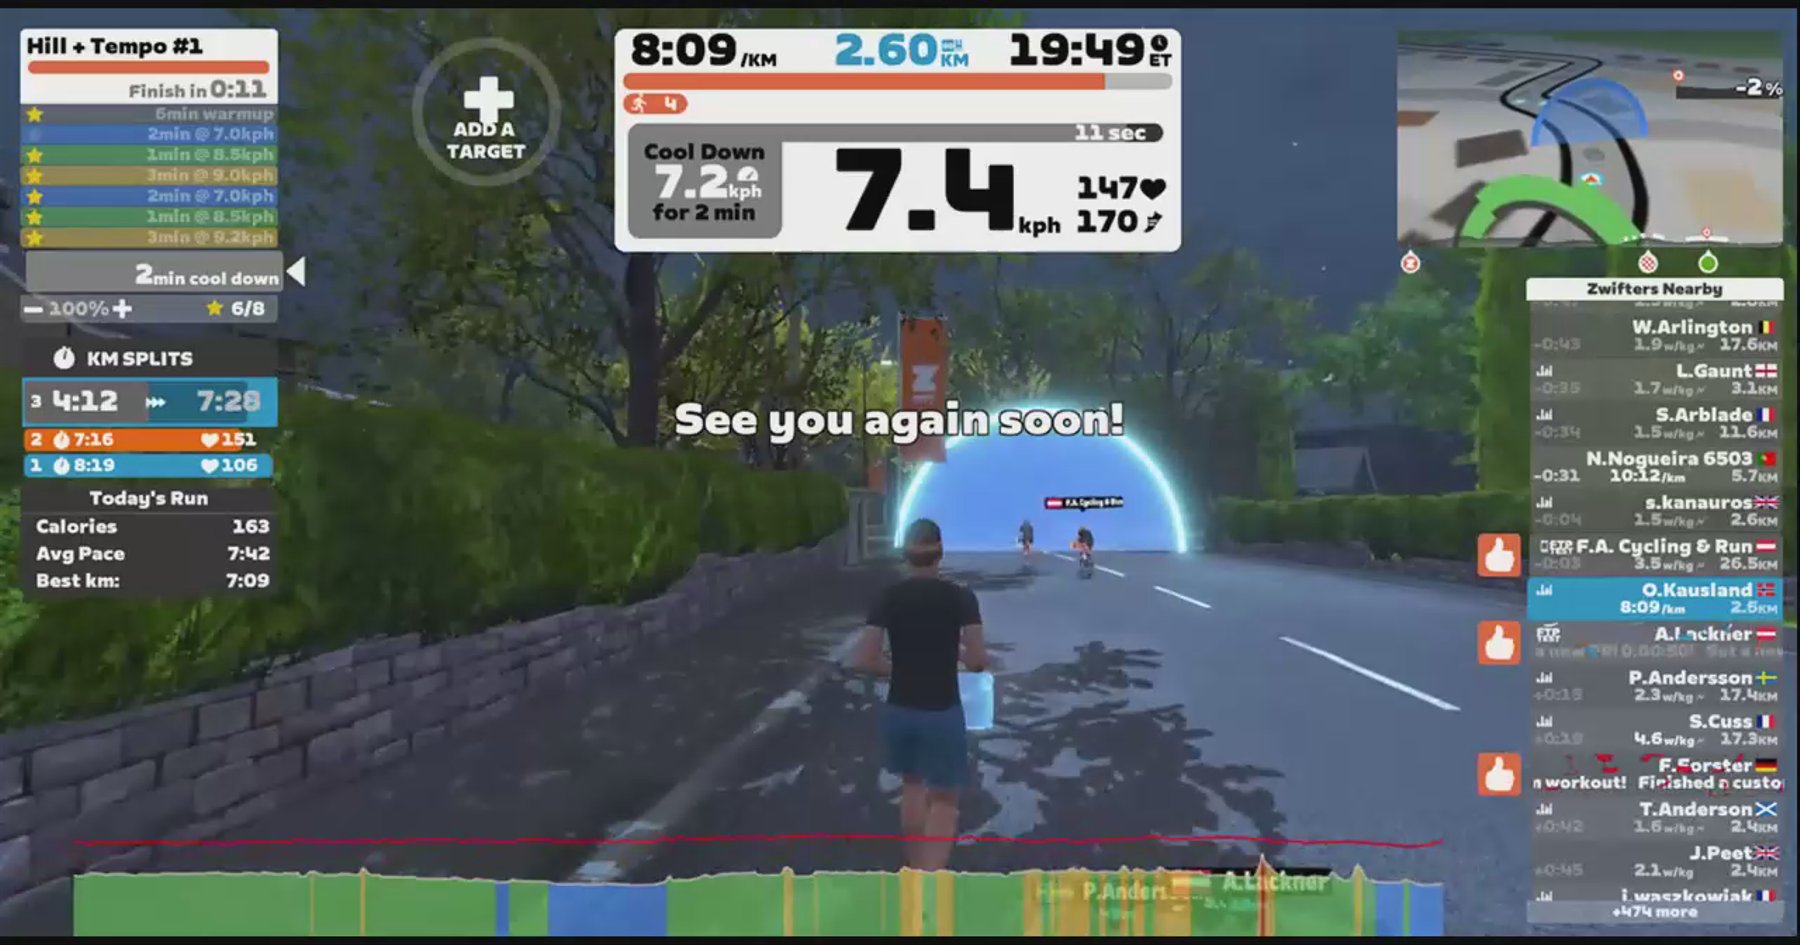 Zwift - Hill + Tempo #1 in Yorkshire